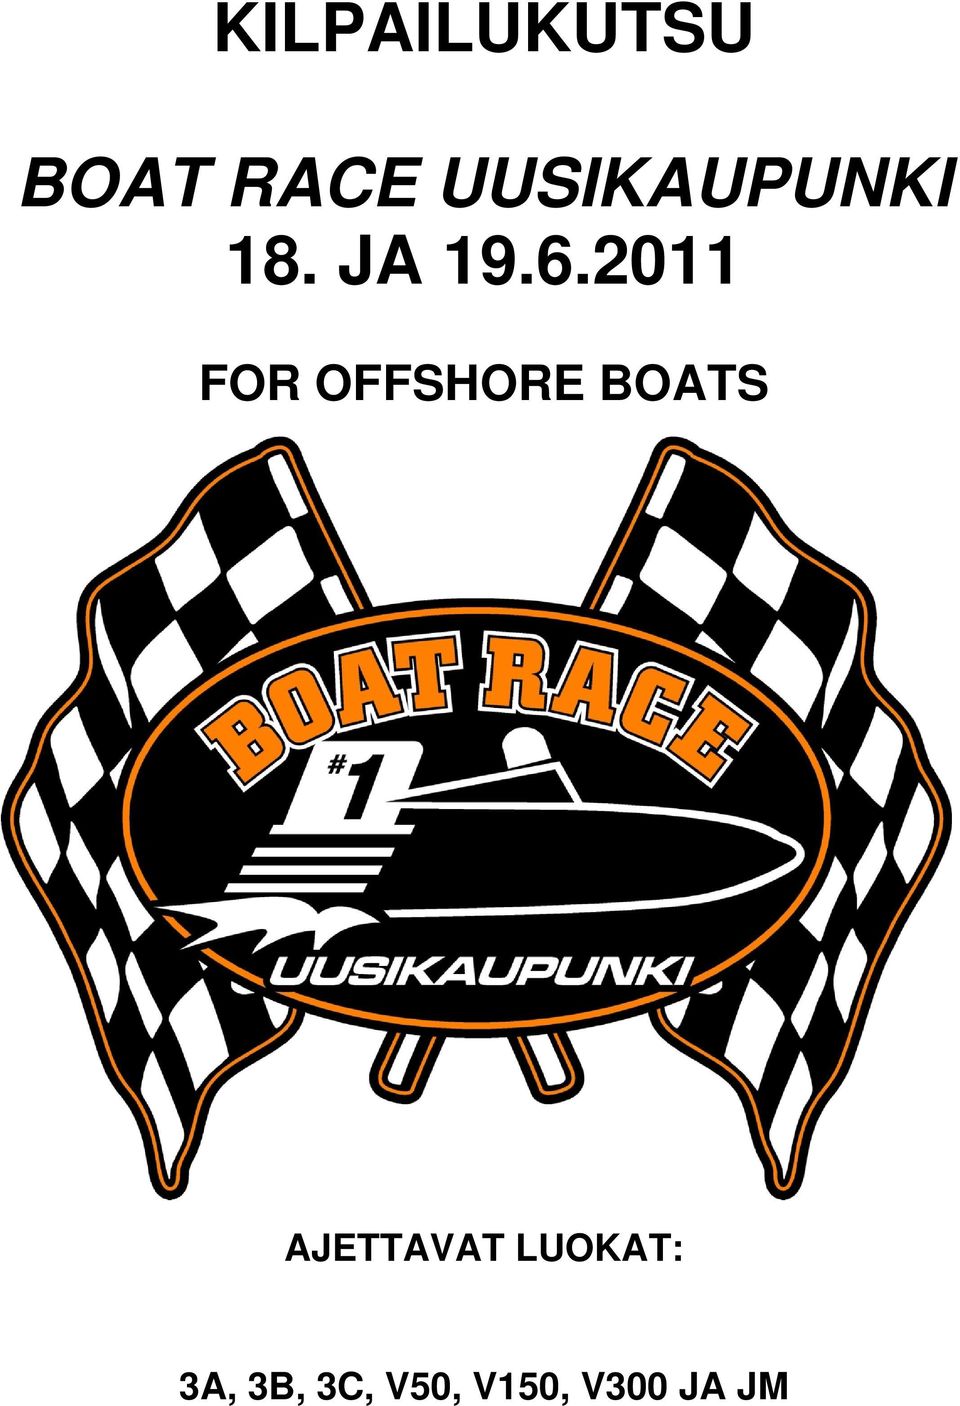 2011 FOR OFFSHORE BOATS